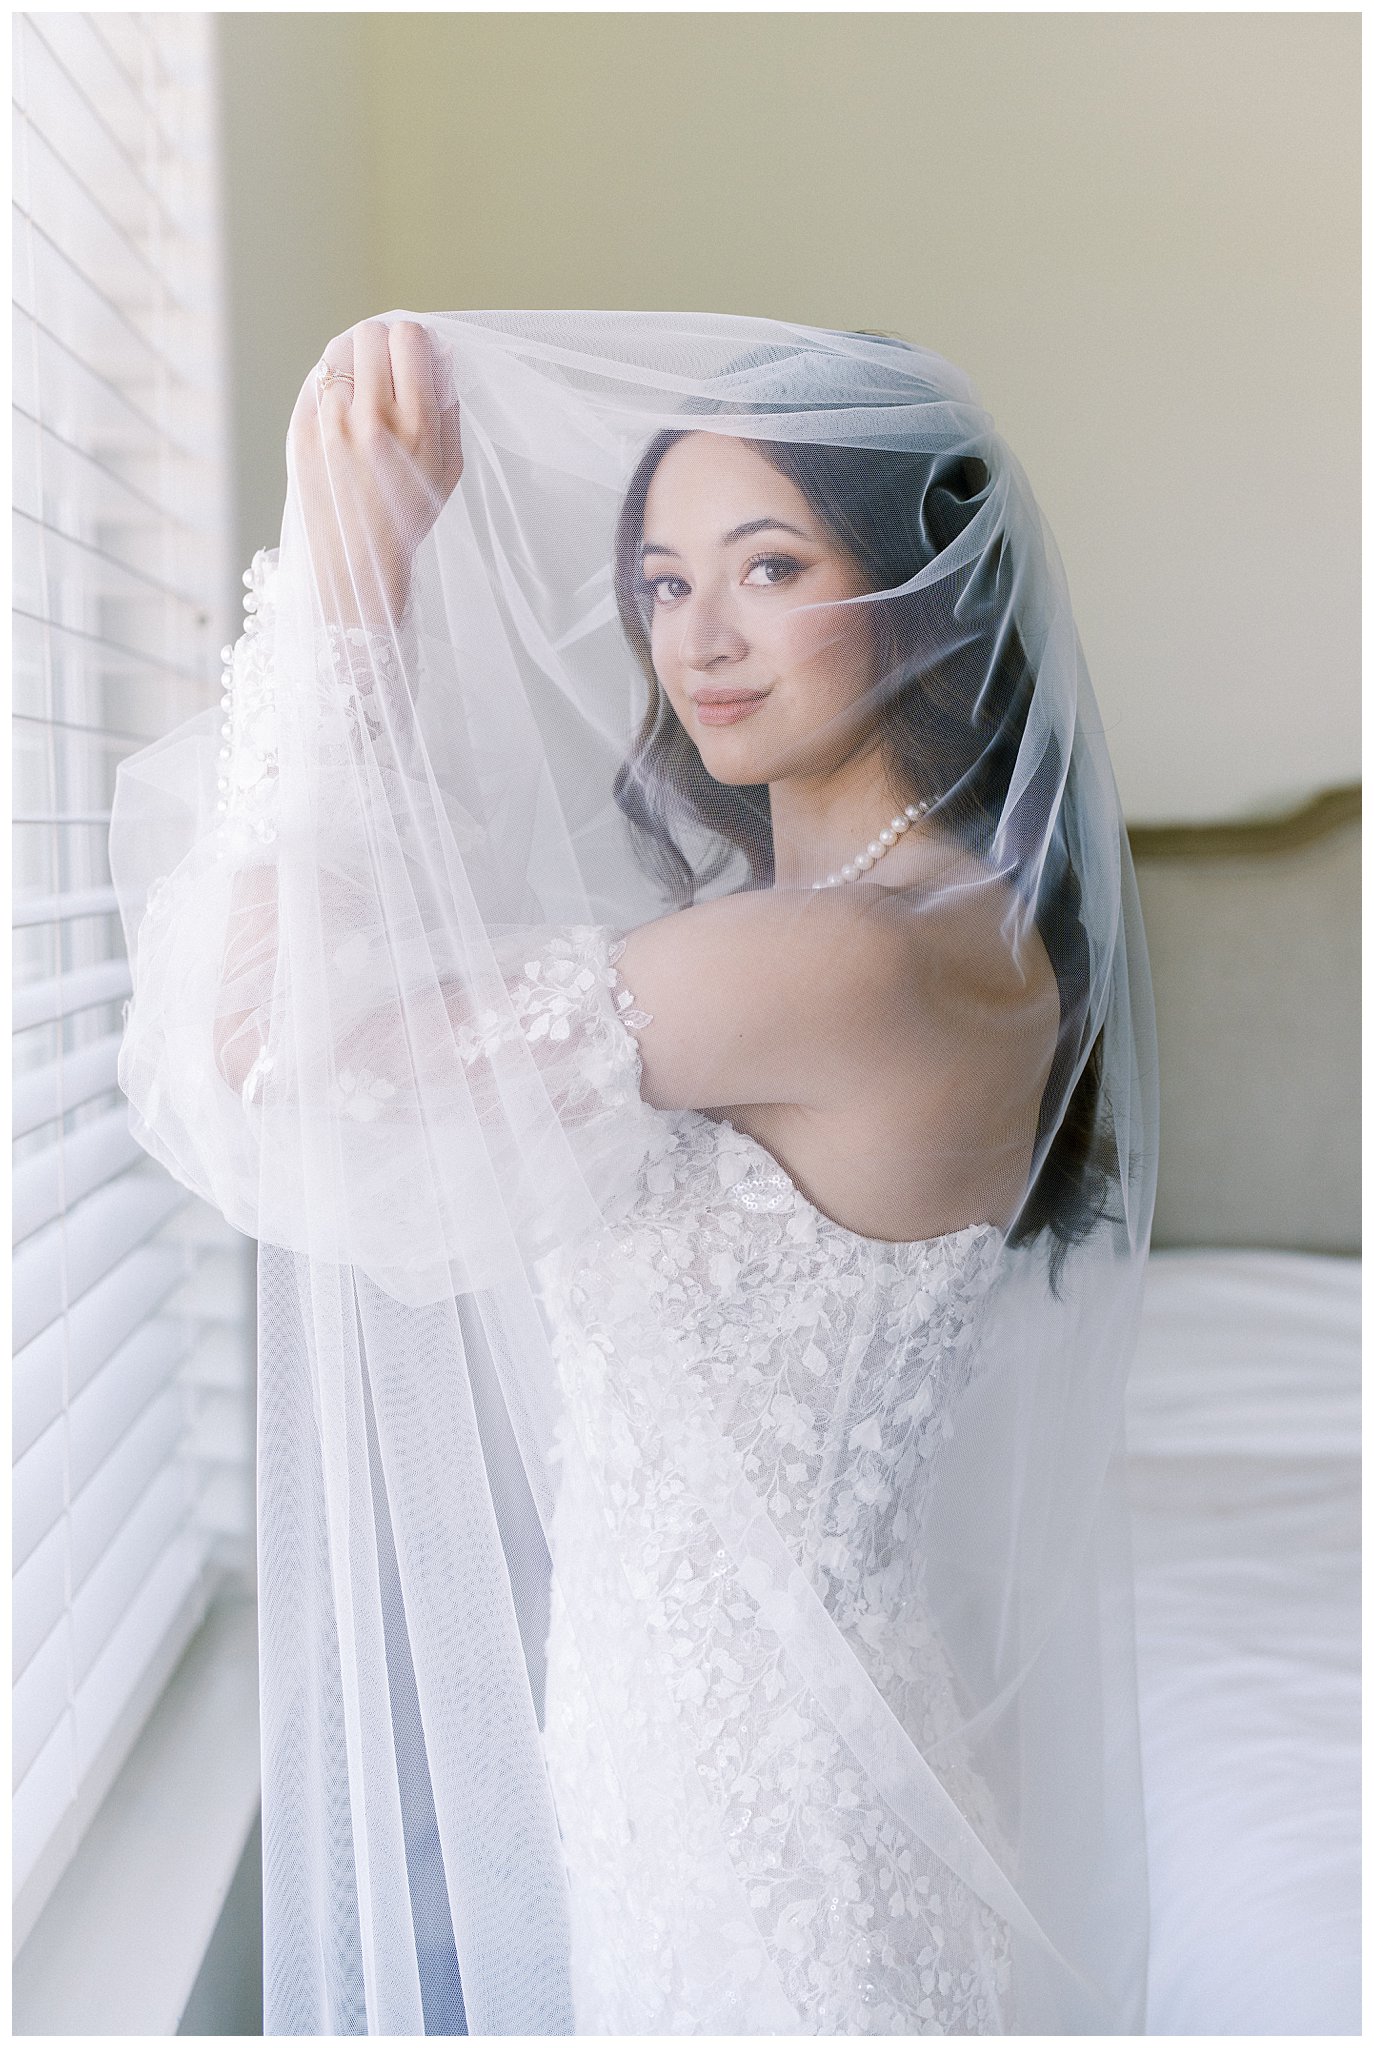 A bridal portrait in the TERRA vineyards manor house in Paso Robles, California.